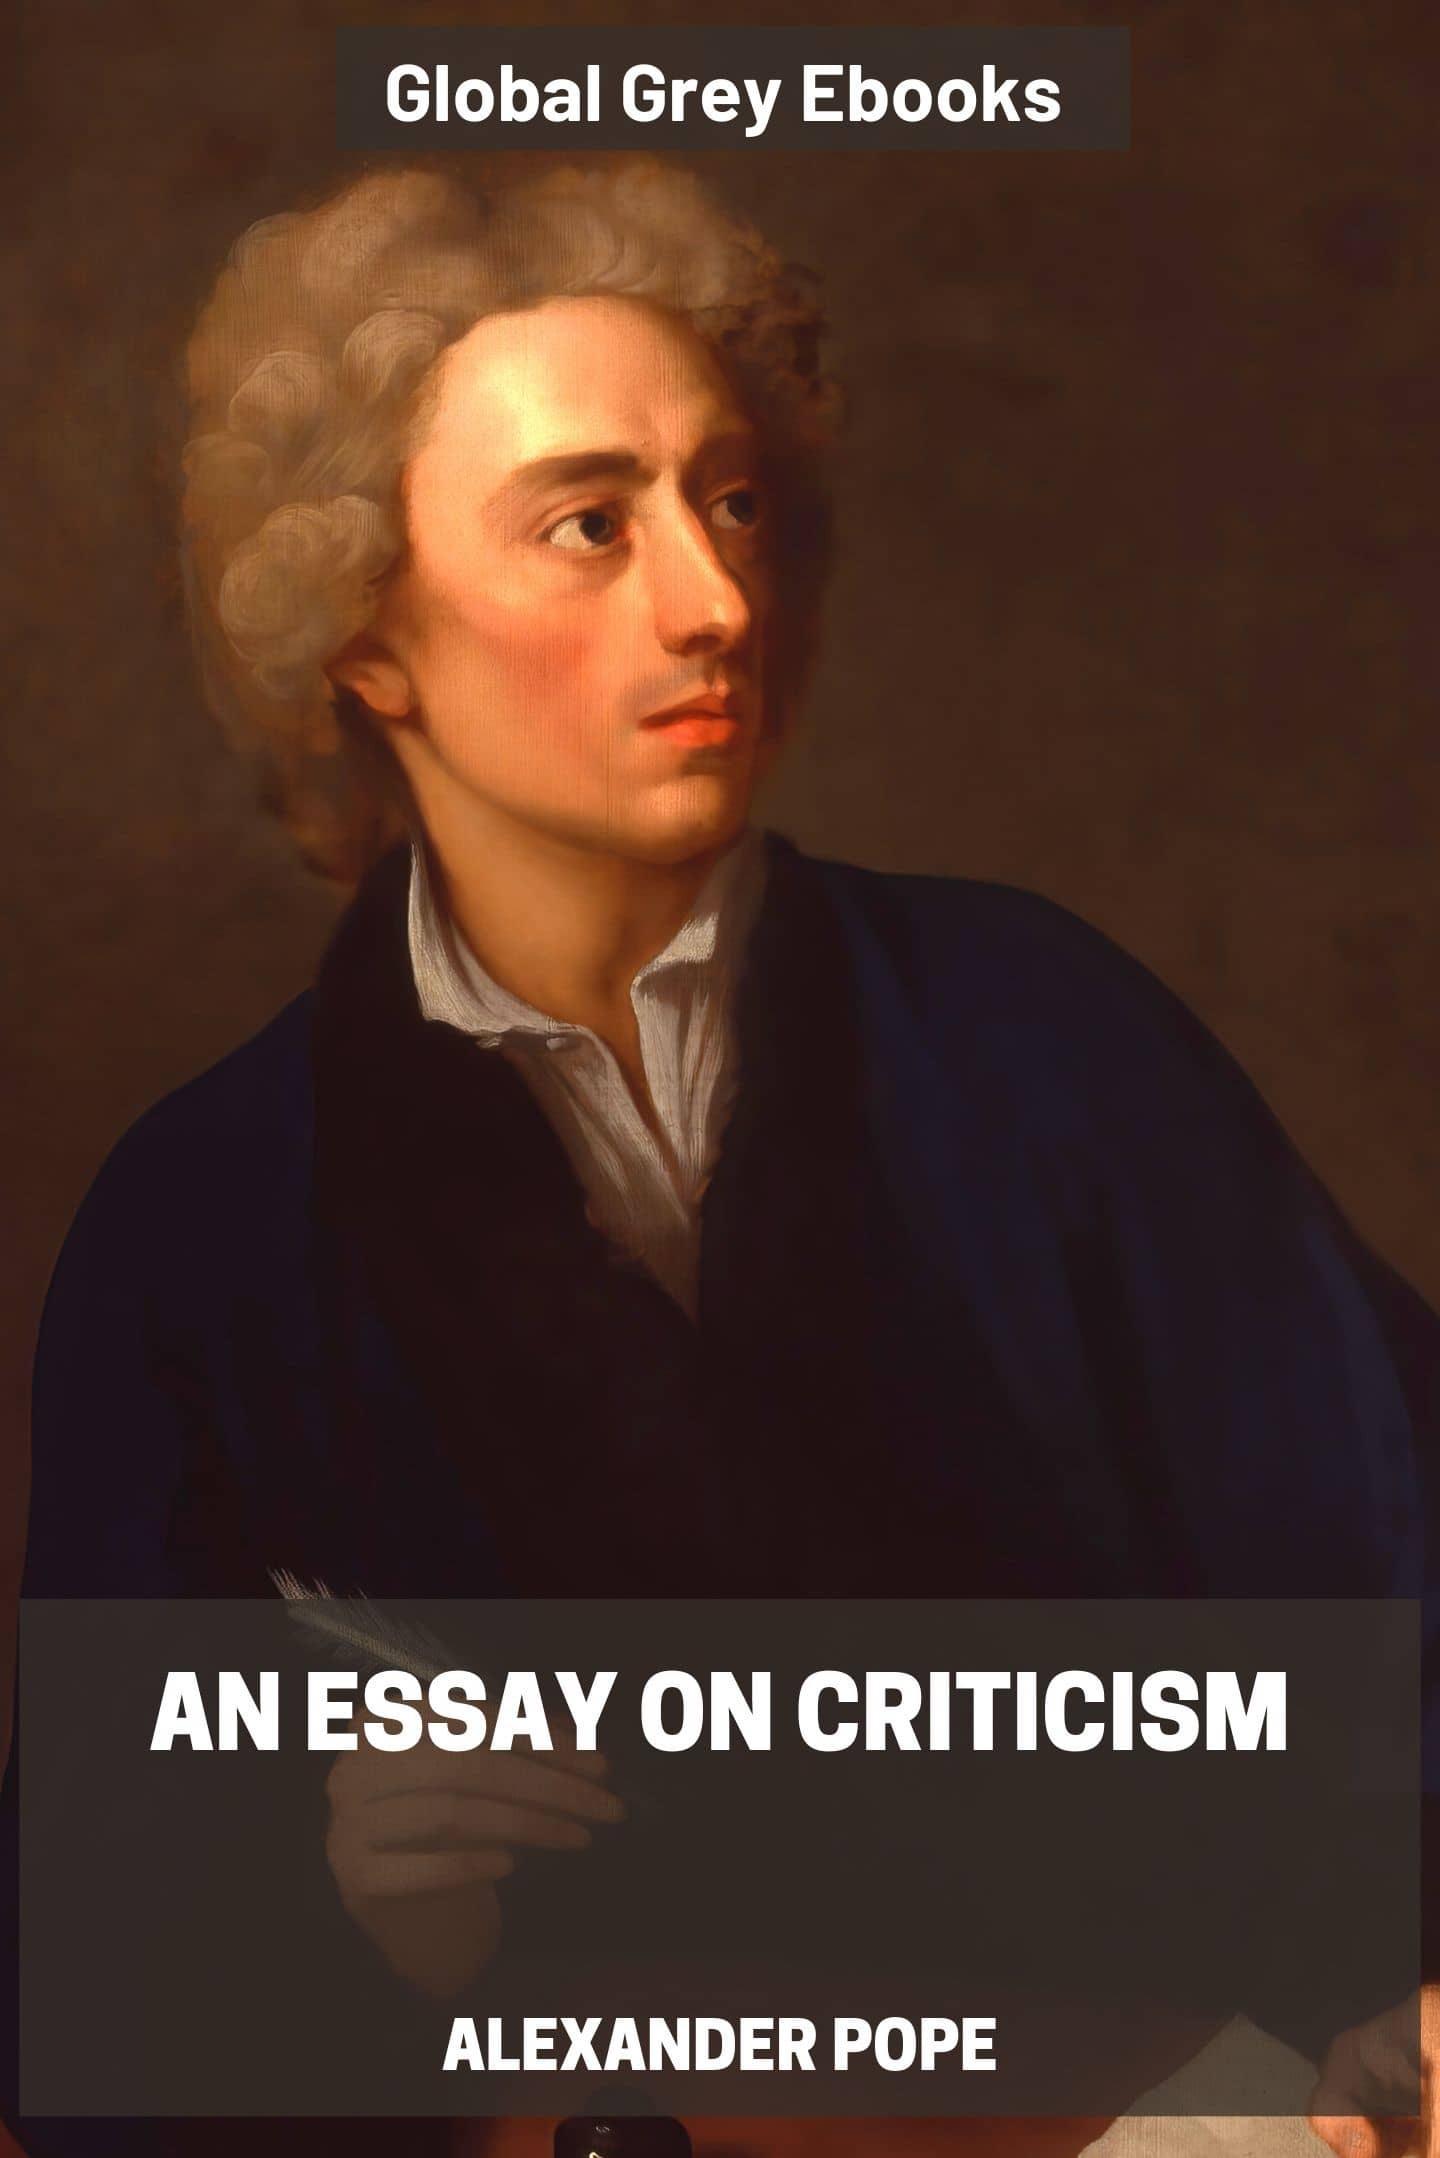 alexander pope essay on criticism quotes